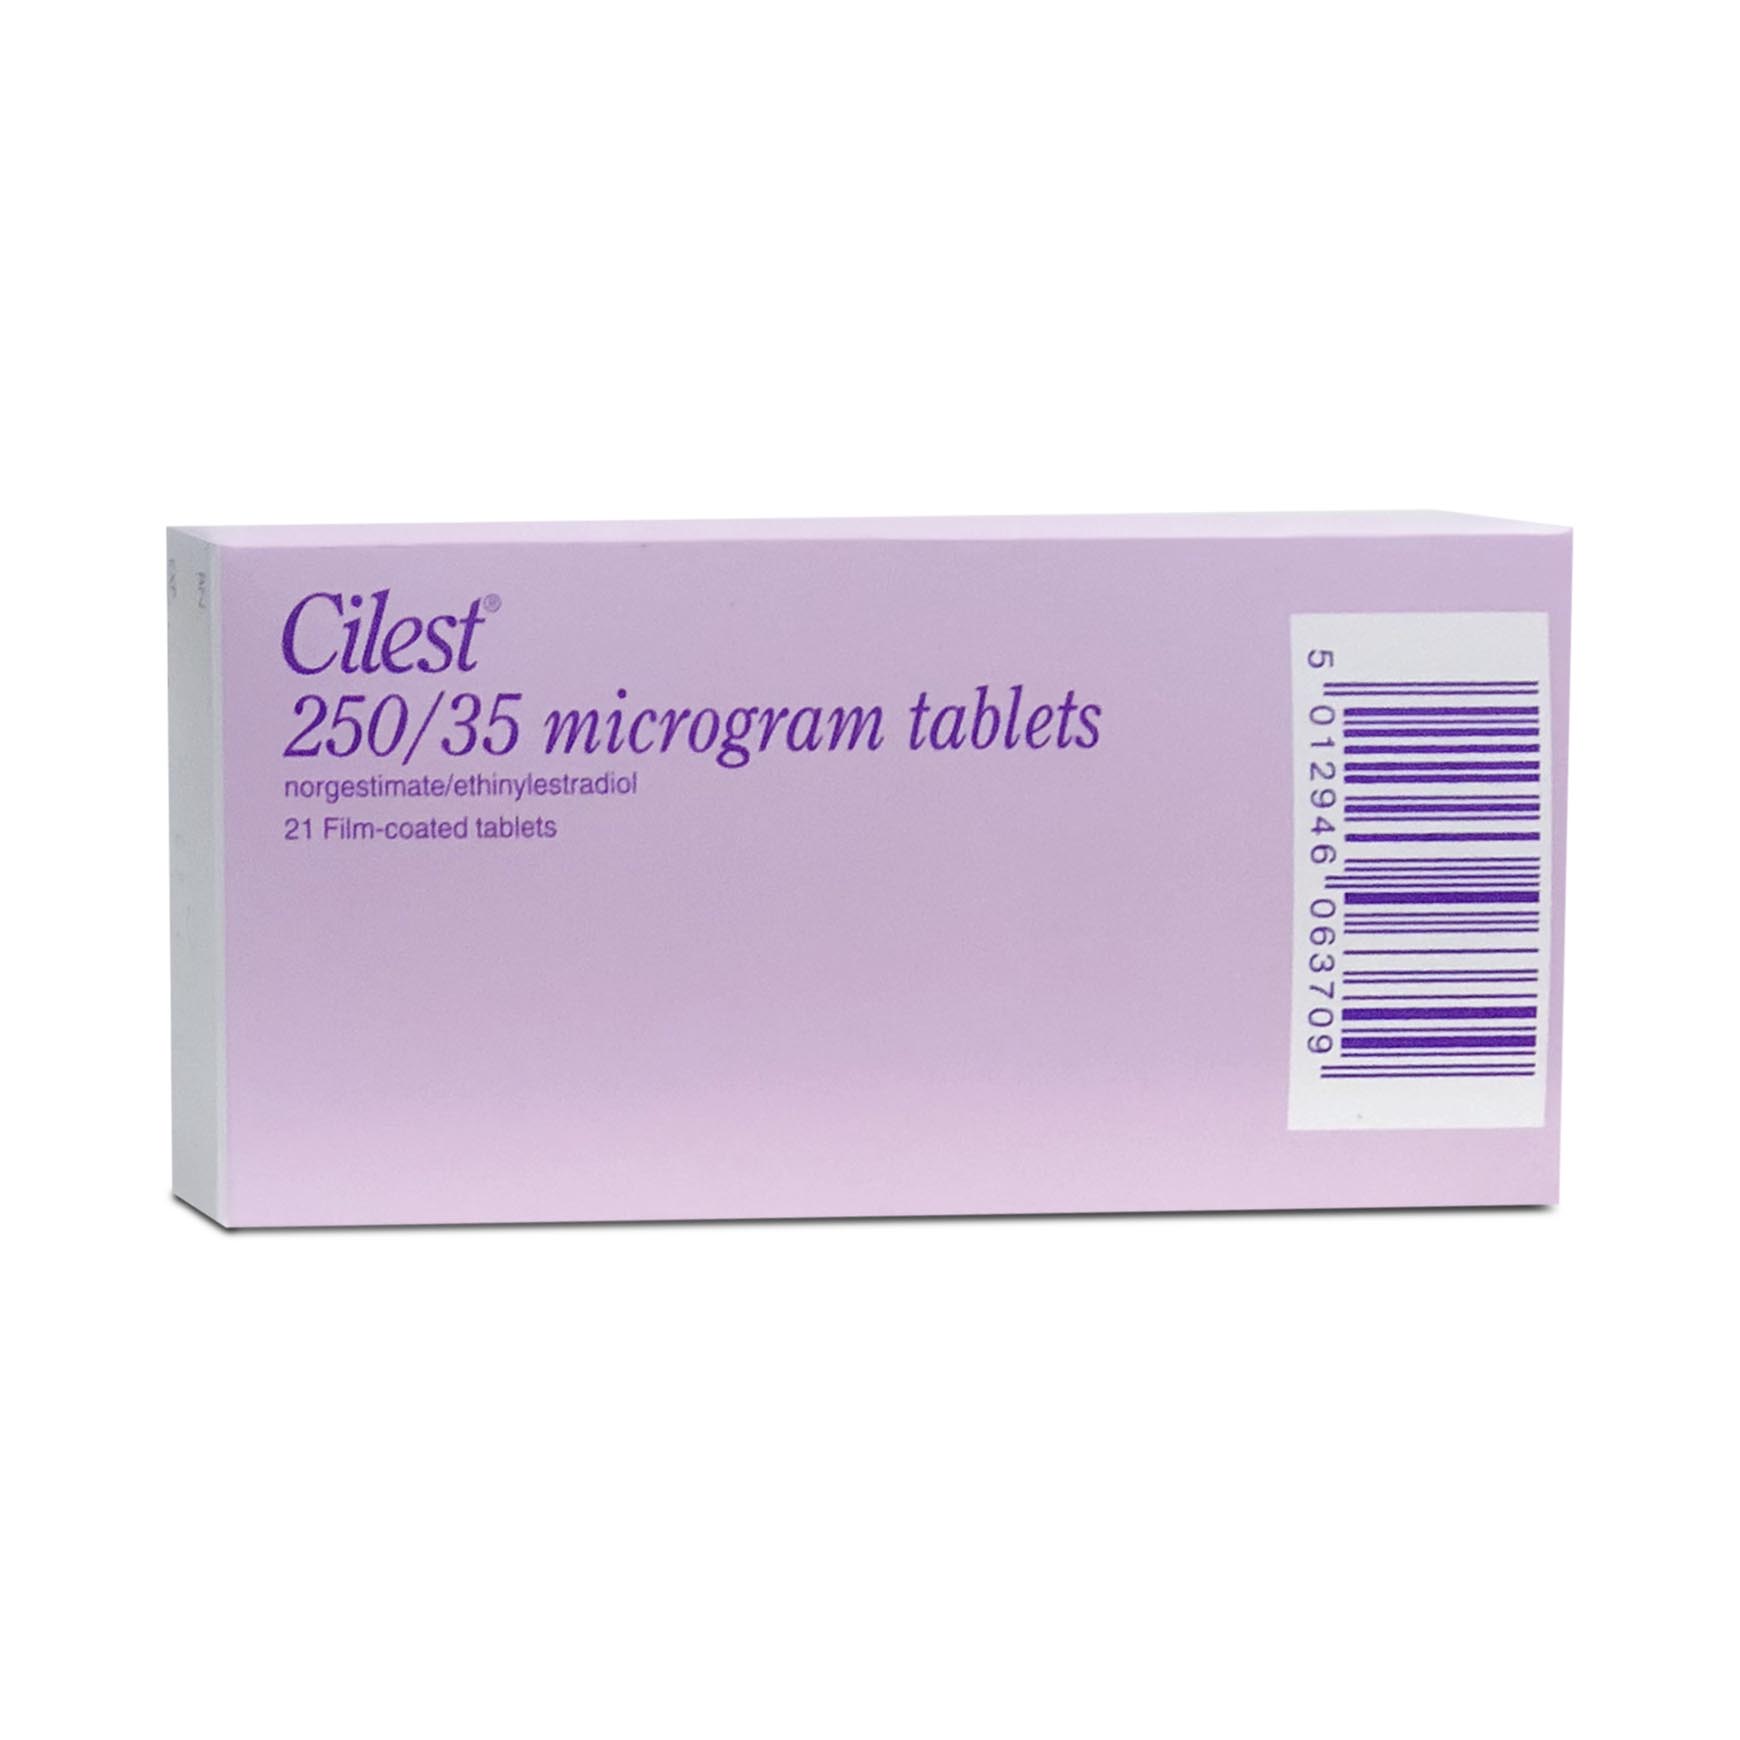 Cilest 21 tablets pink box